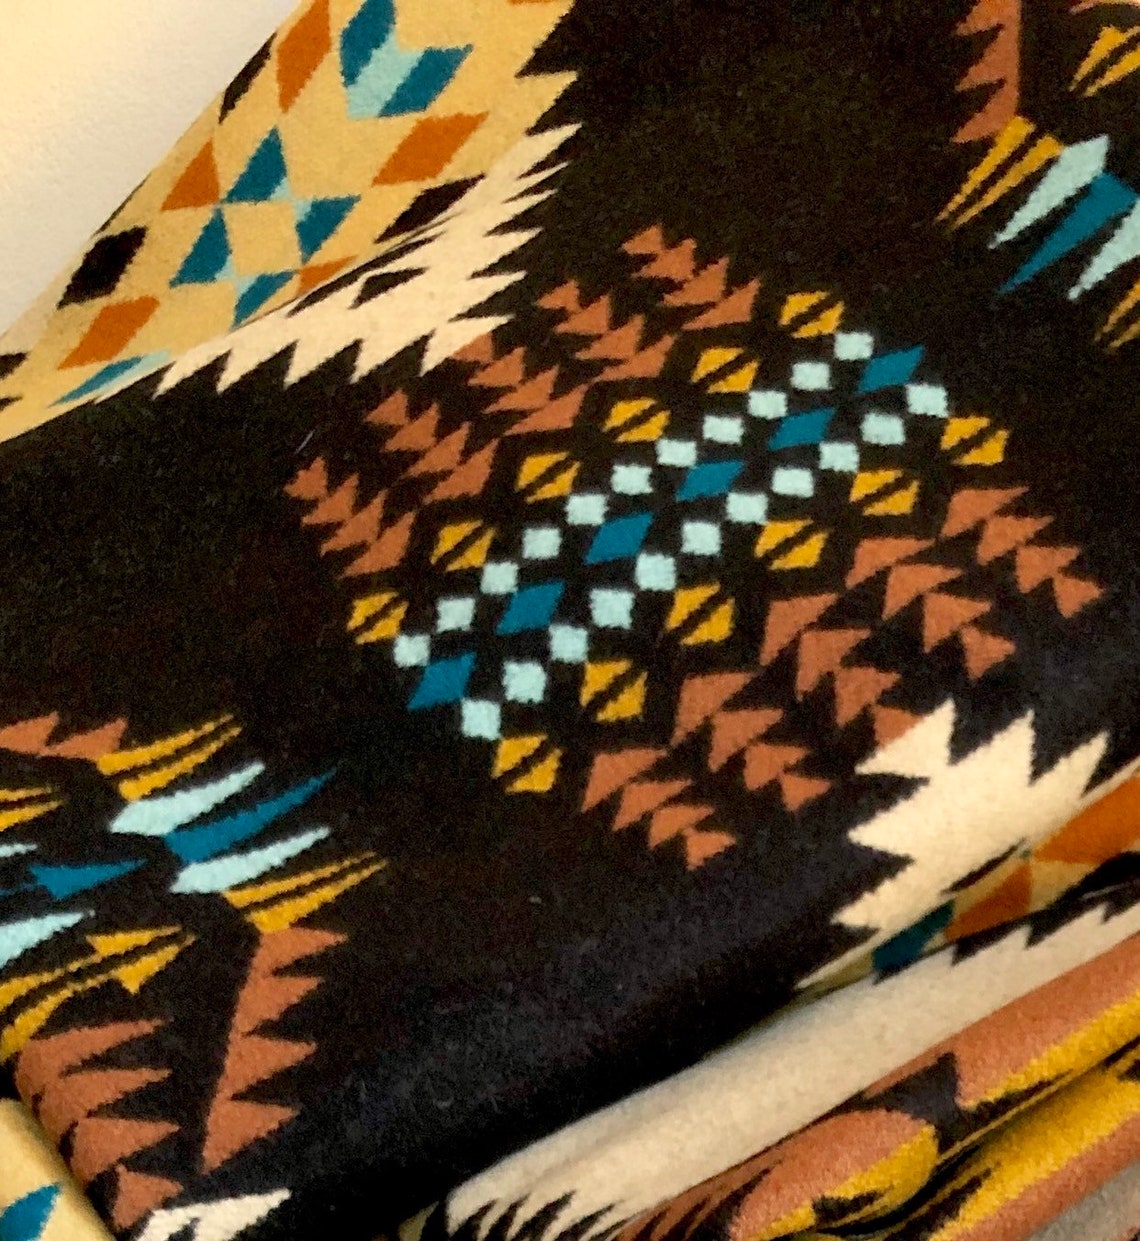 Wool Blanket in Gold Black Turquoise Rancho Arroyo Native | Etsy